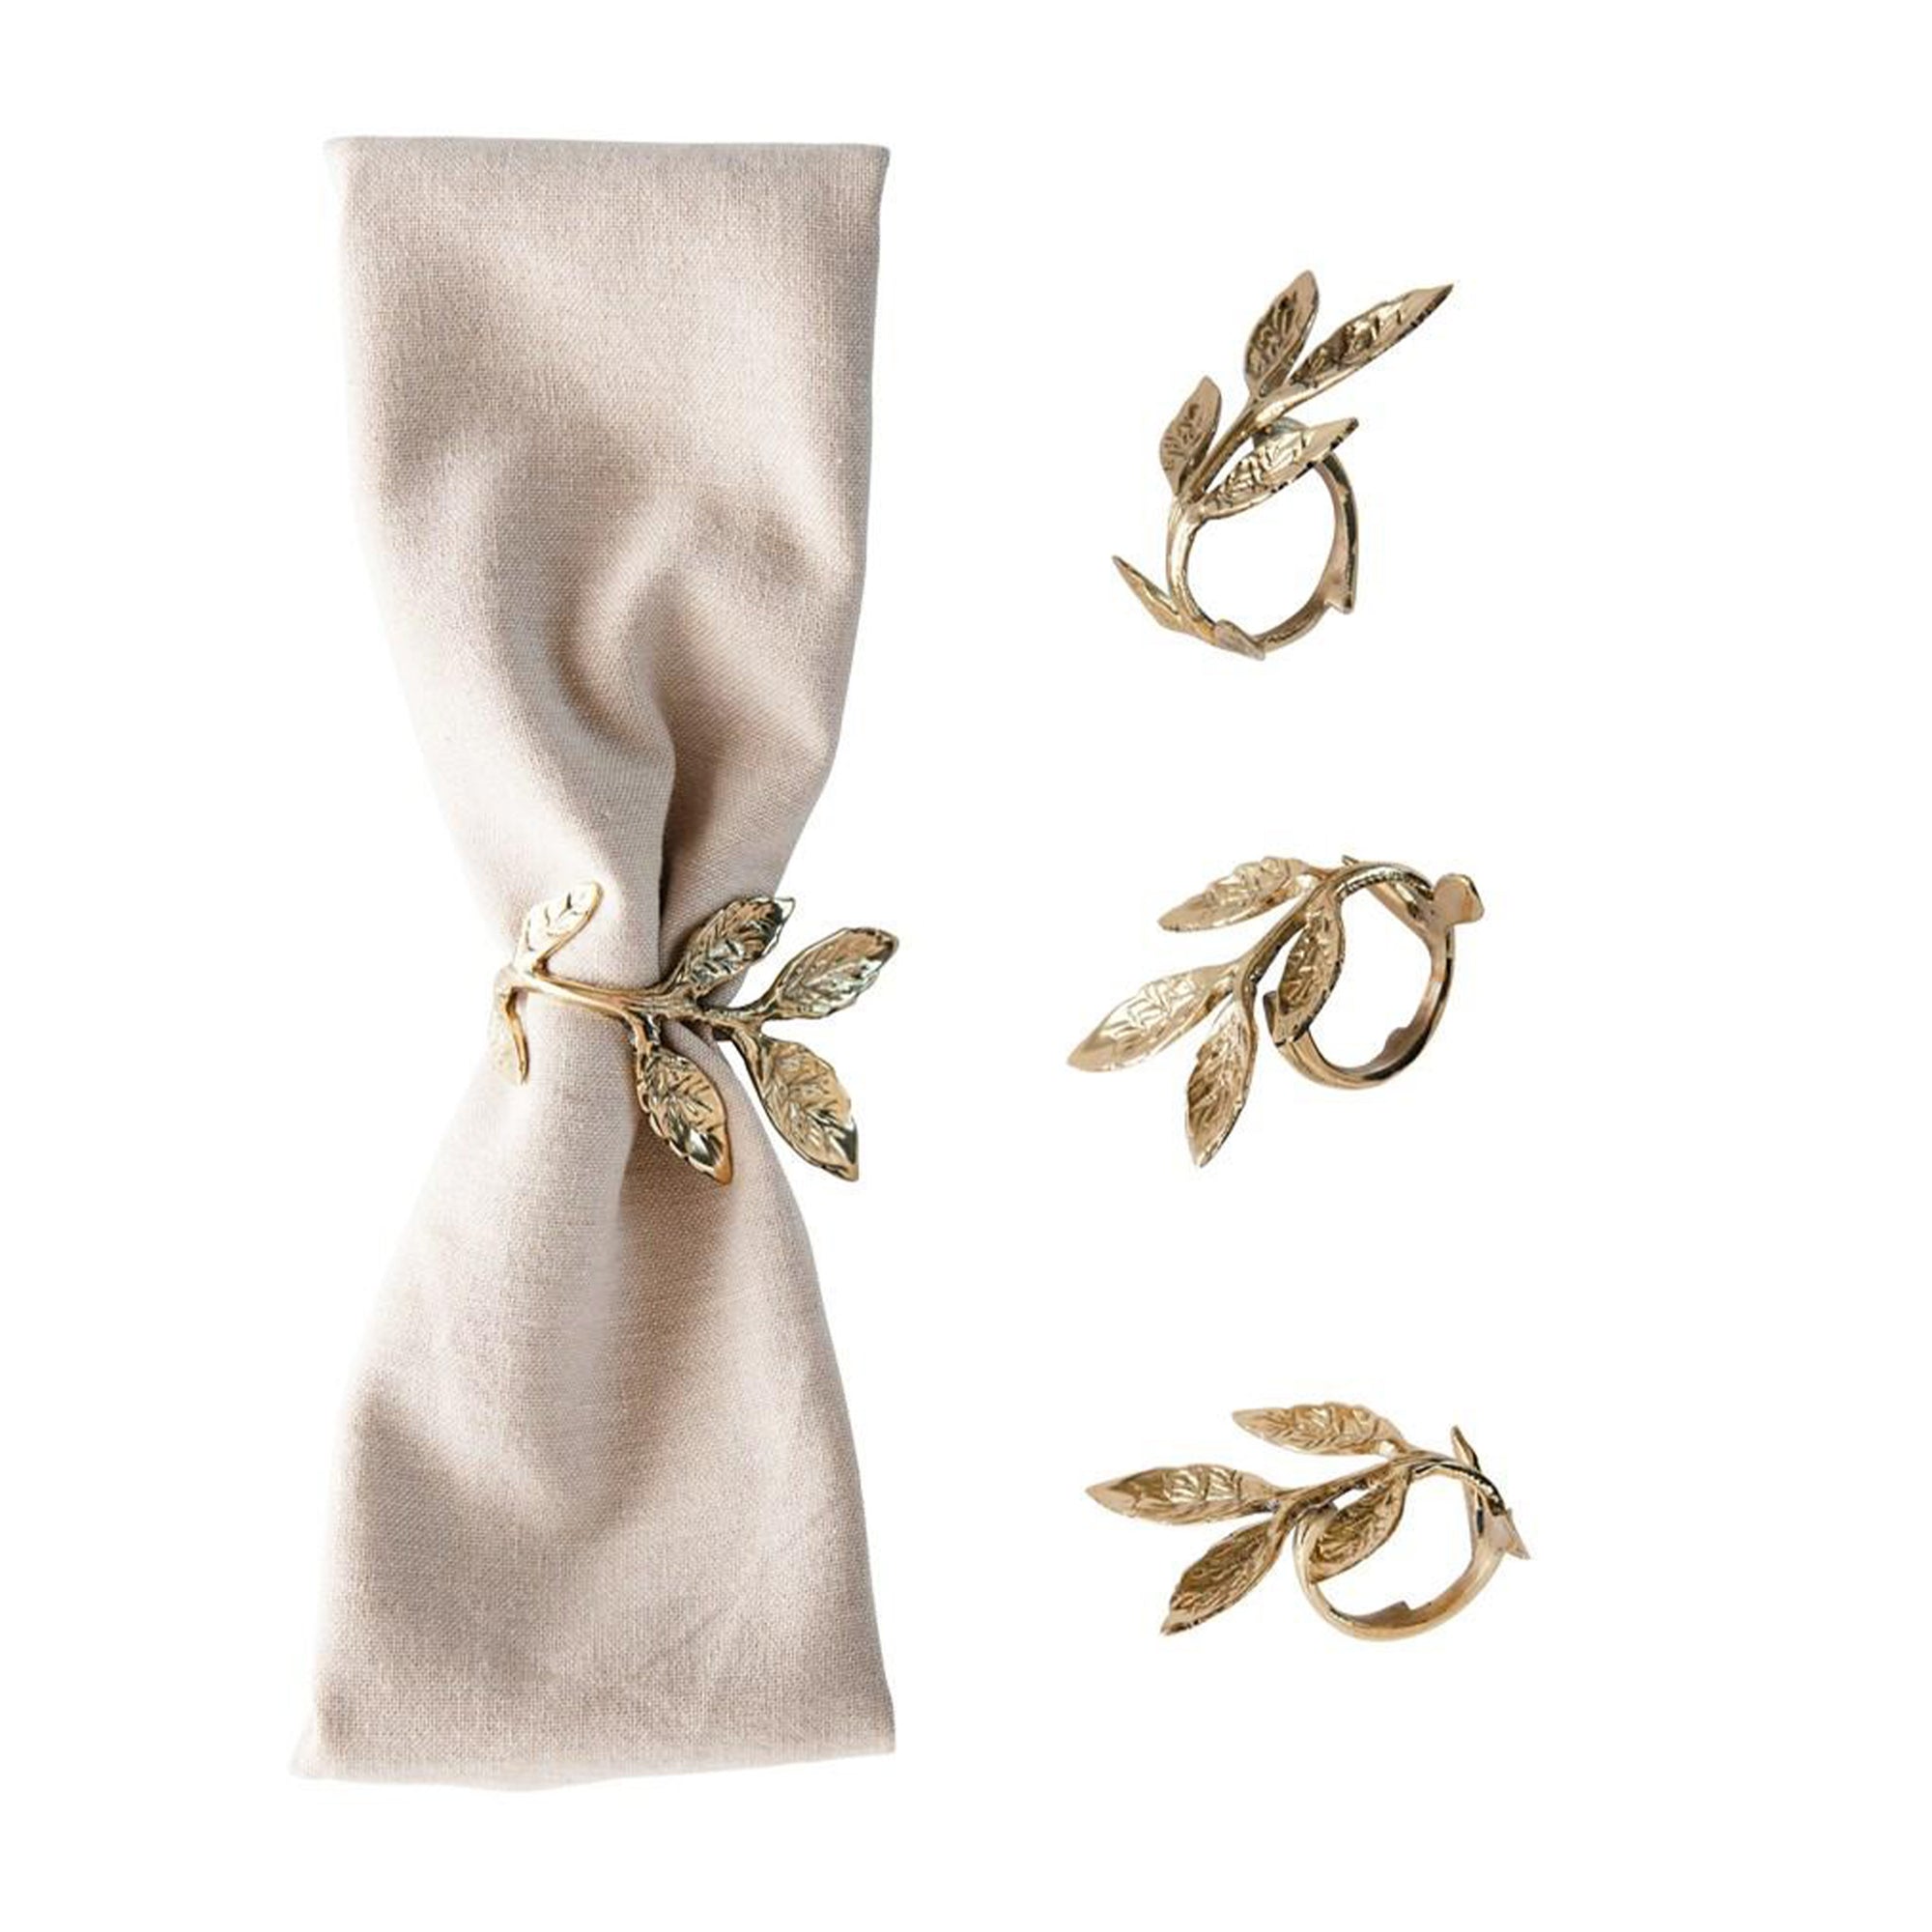 Brass Napkin Rings with Leaves